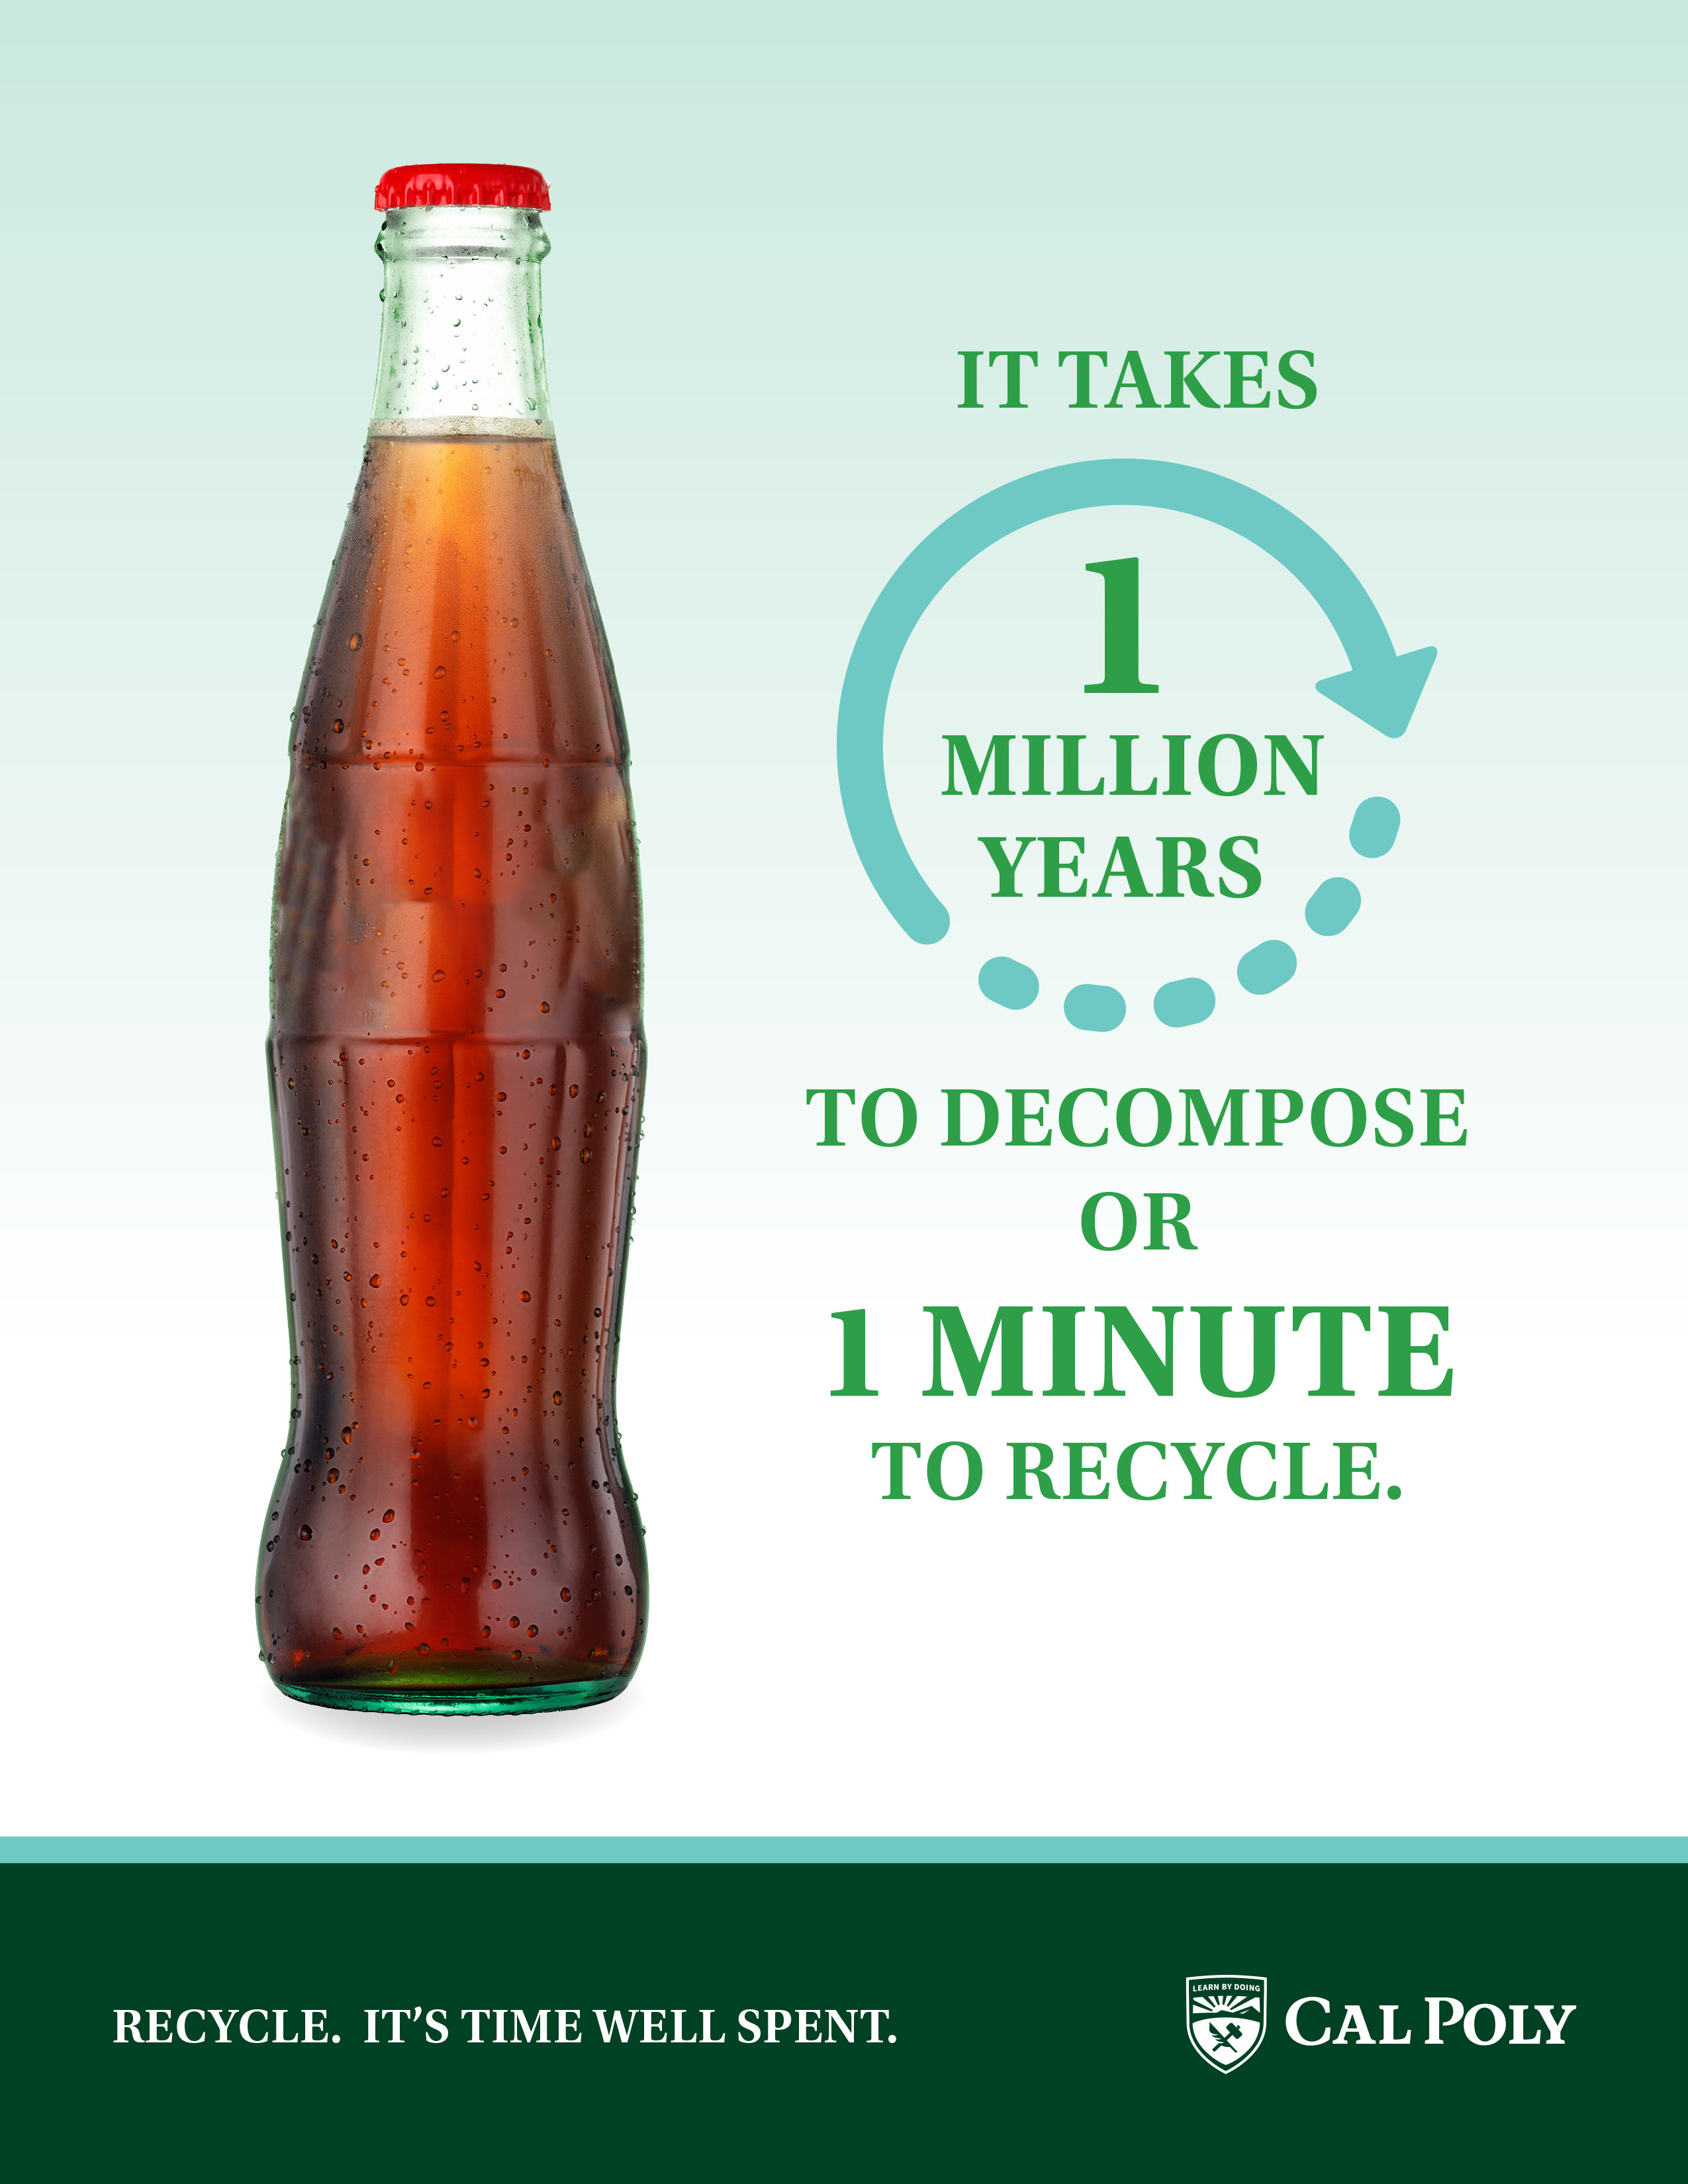 It takes 1 million years to decompose a bottle of soda or 1 minute to recycle it